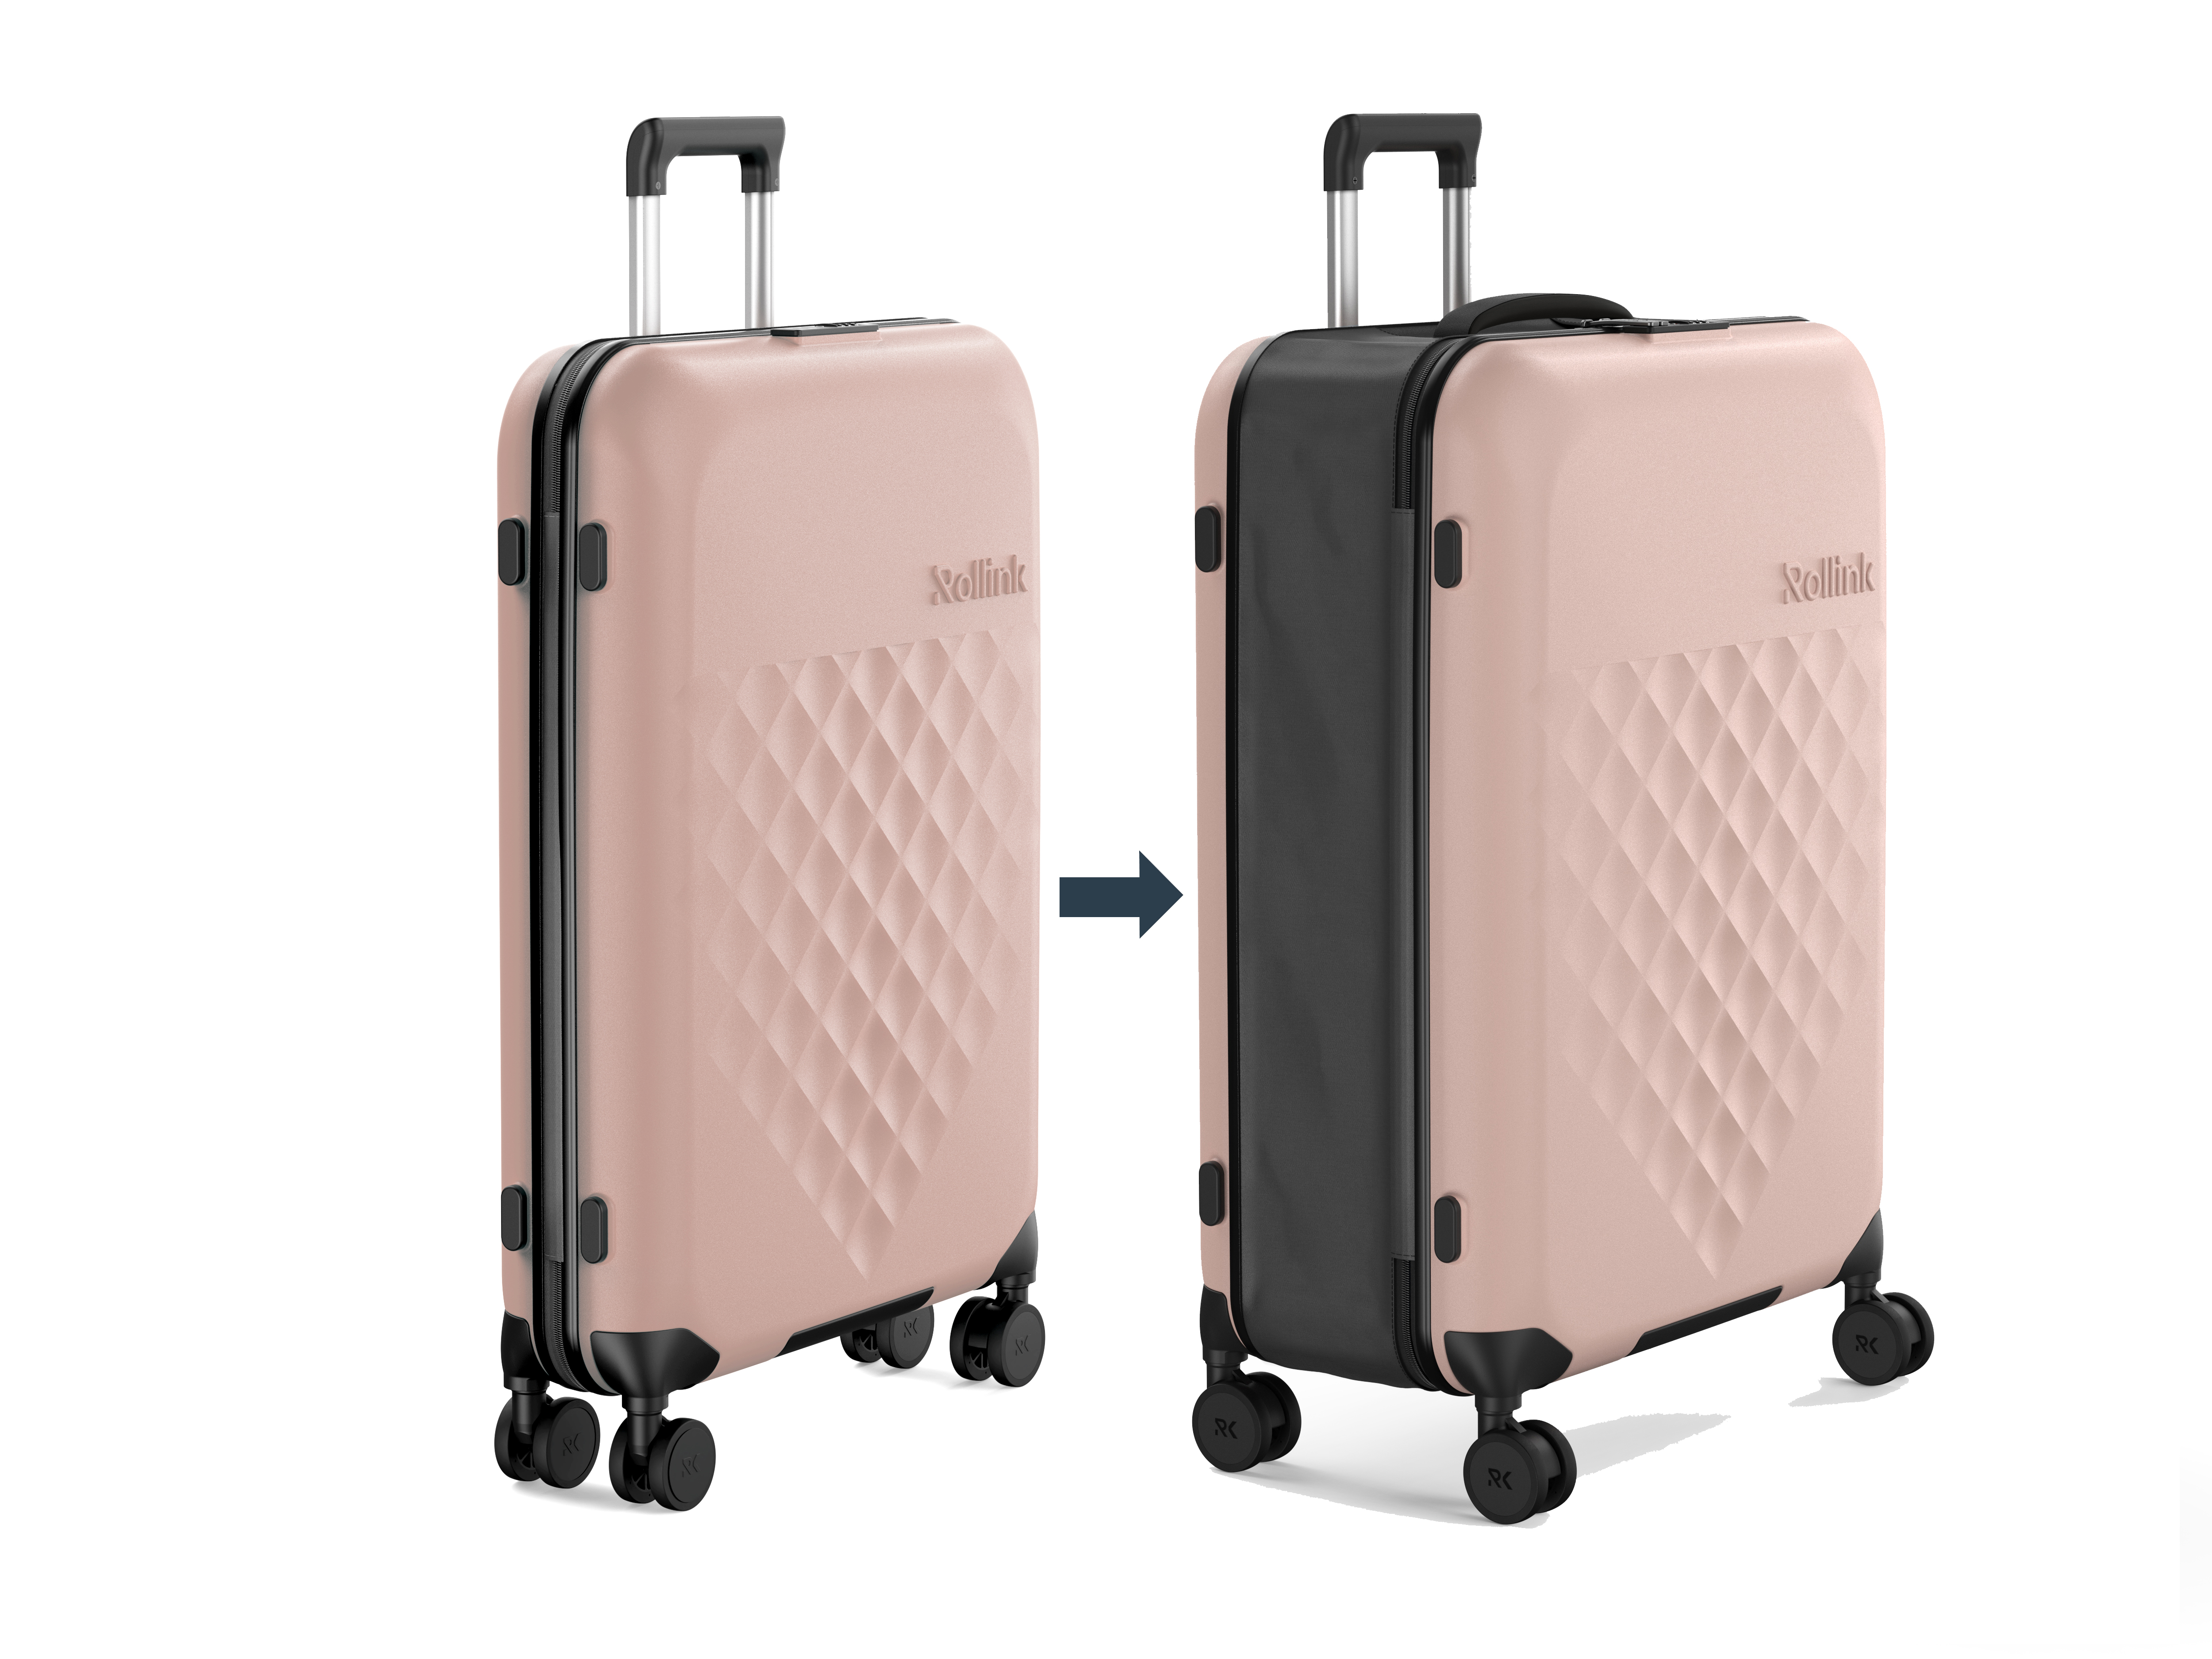 Rollink Flex 360° Spinner Collapsible 4-Wheel 29 inch Checked Luggage, Rose Smoke